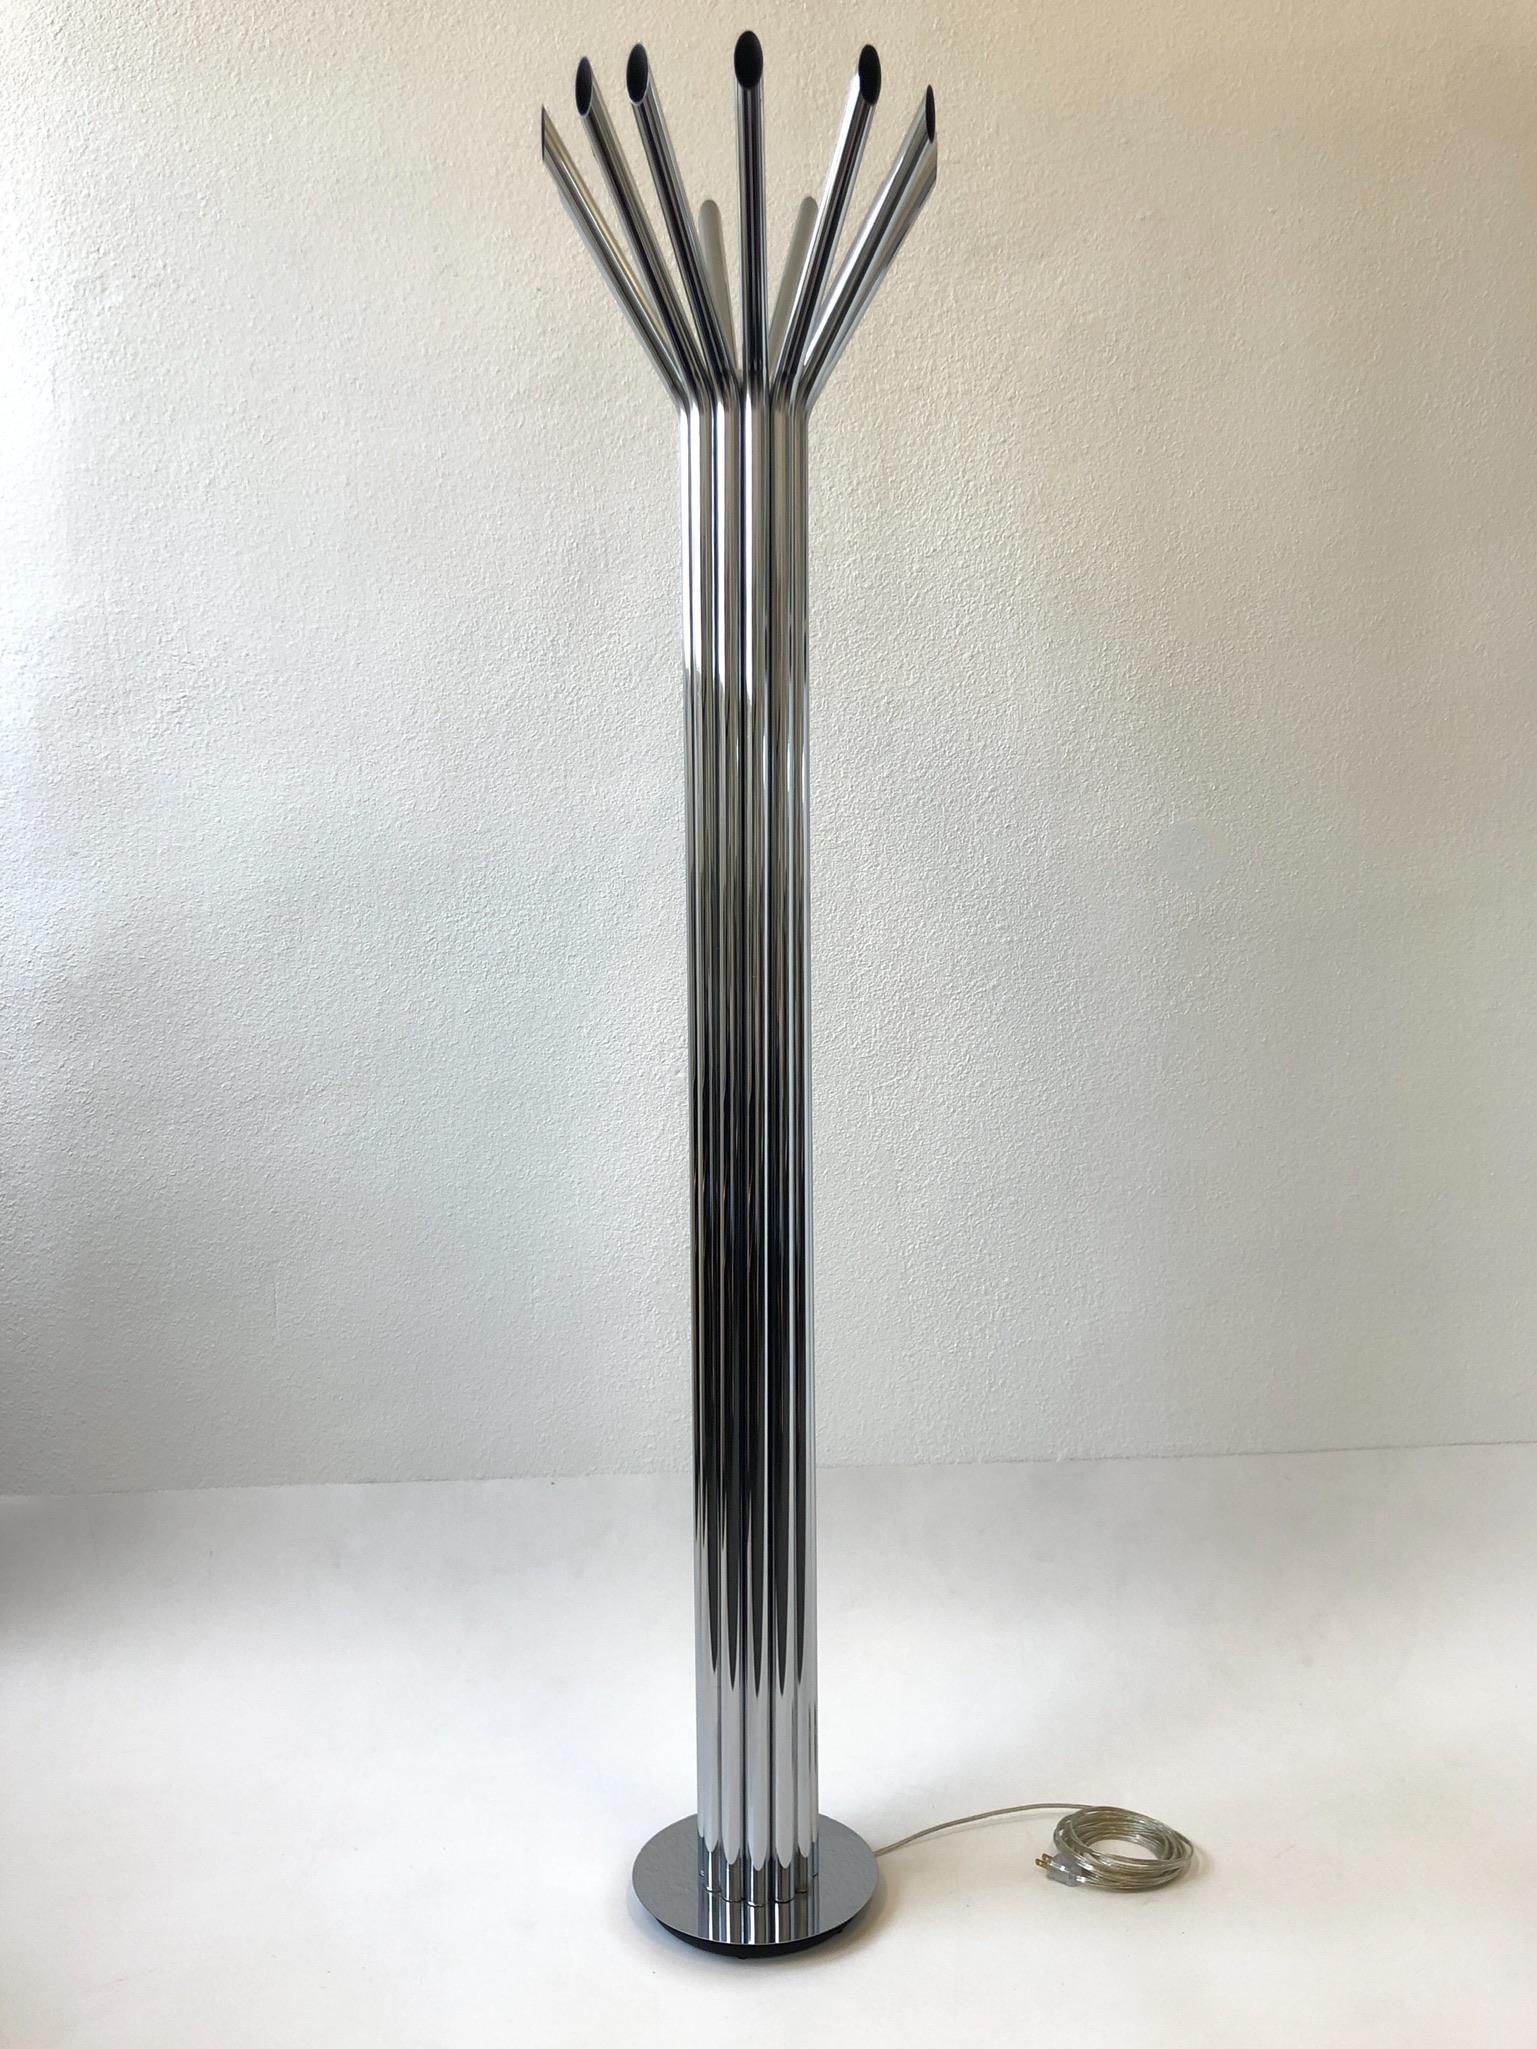 Late 20th Century Chrome Torchiere Floor Lamp by George Kovacs For Sale